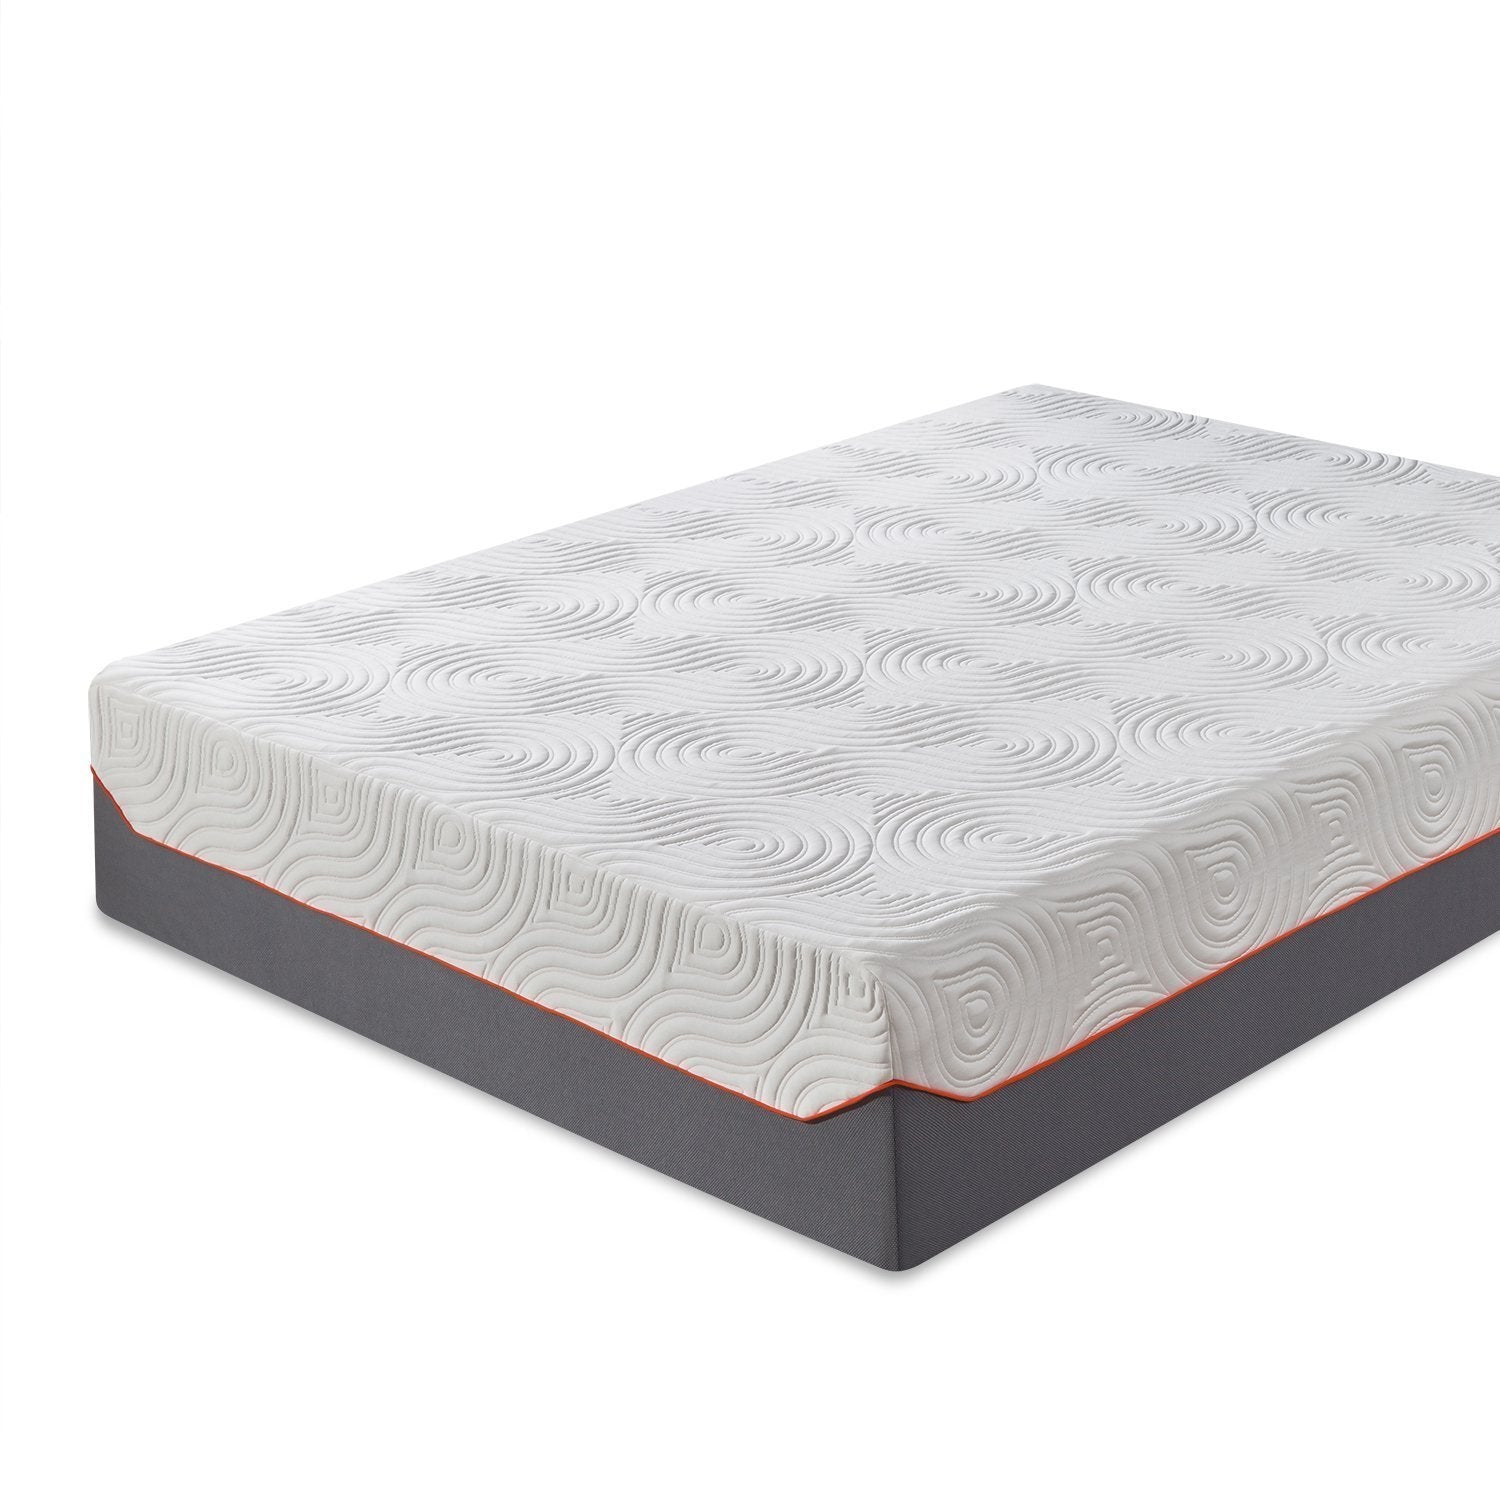 Cooling Memory Foam and iCoil Spring Hybrid Mattress